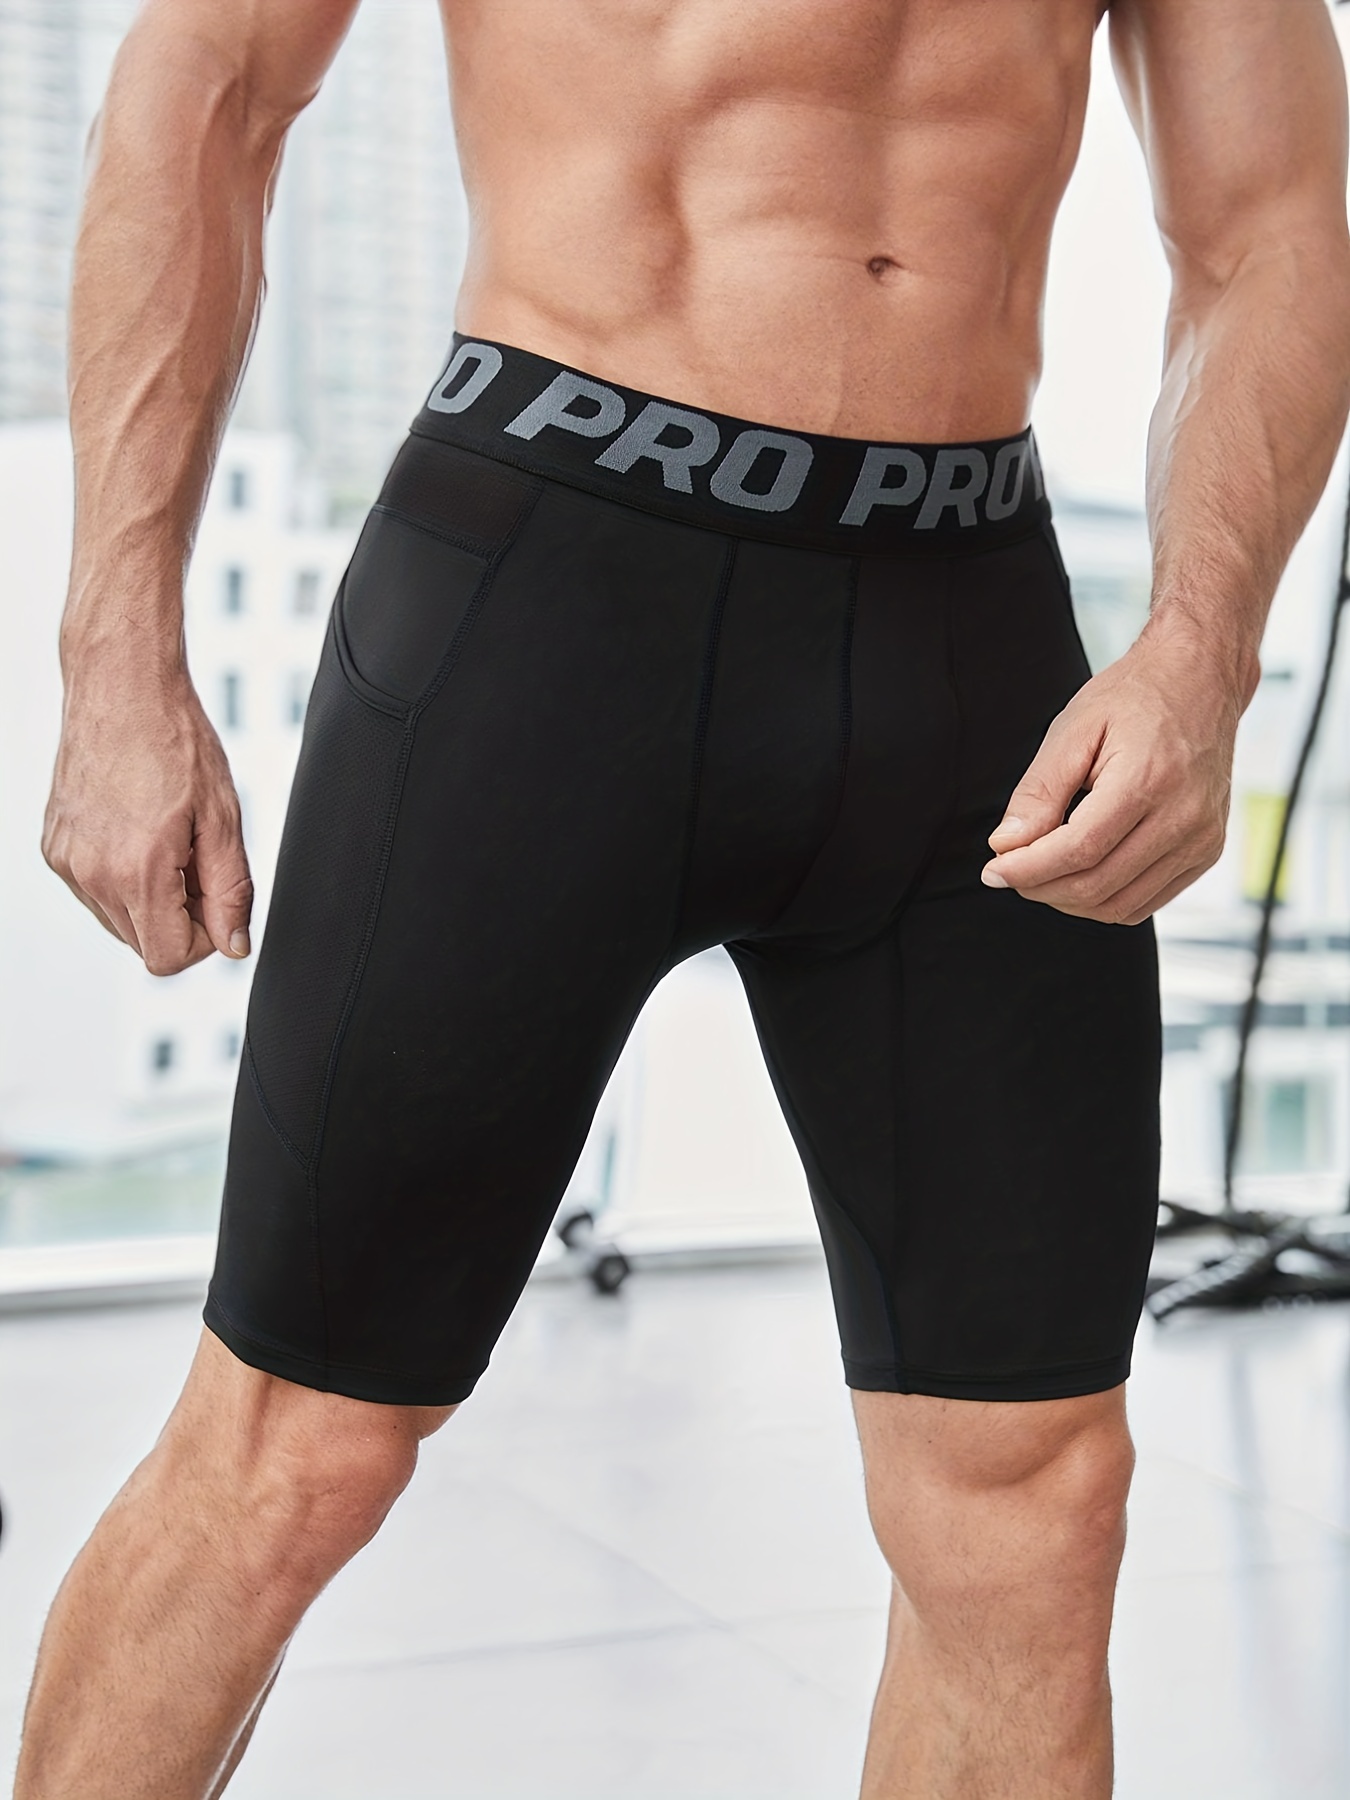 Quick Dry Compression Training Shorts And Leggings Set For Men Perfect For  Gym, Fitness, And Sports Fake Two Piece Design Comfortable And Stylish  Sports Trousers Style 2241 From Cdrty653, $11.08